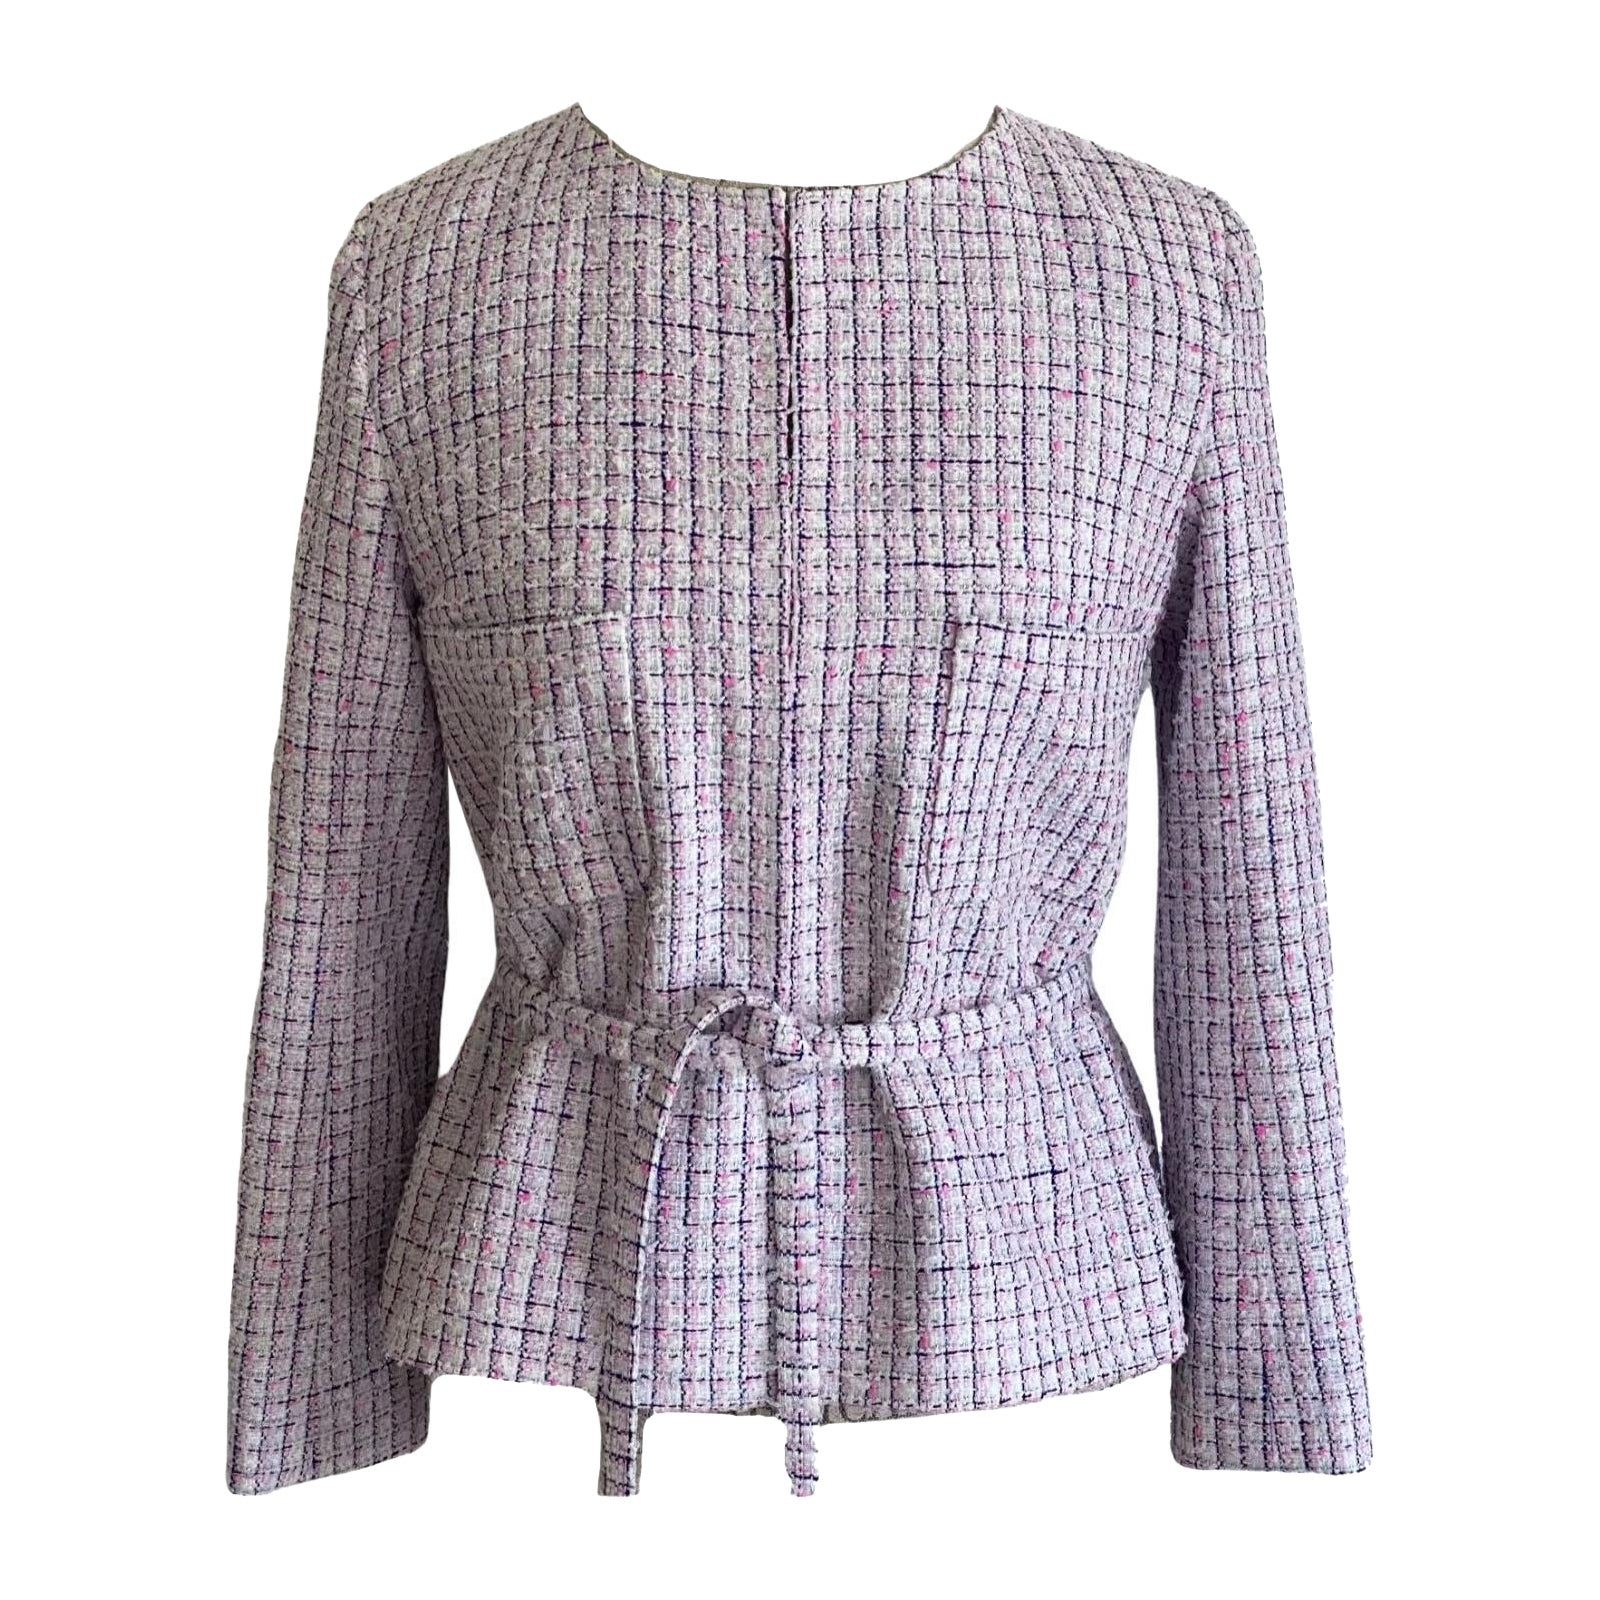 Chanel Lesage Tweed Jacket in Lilac For Sale